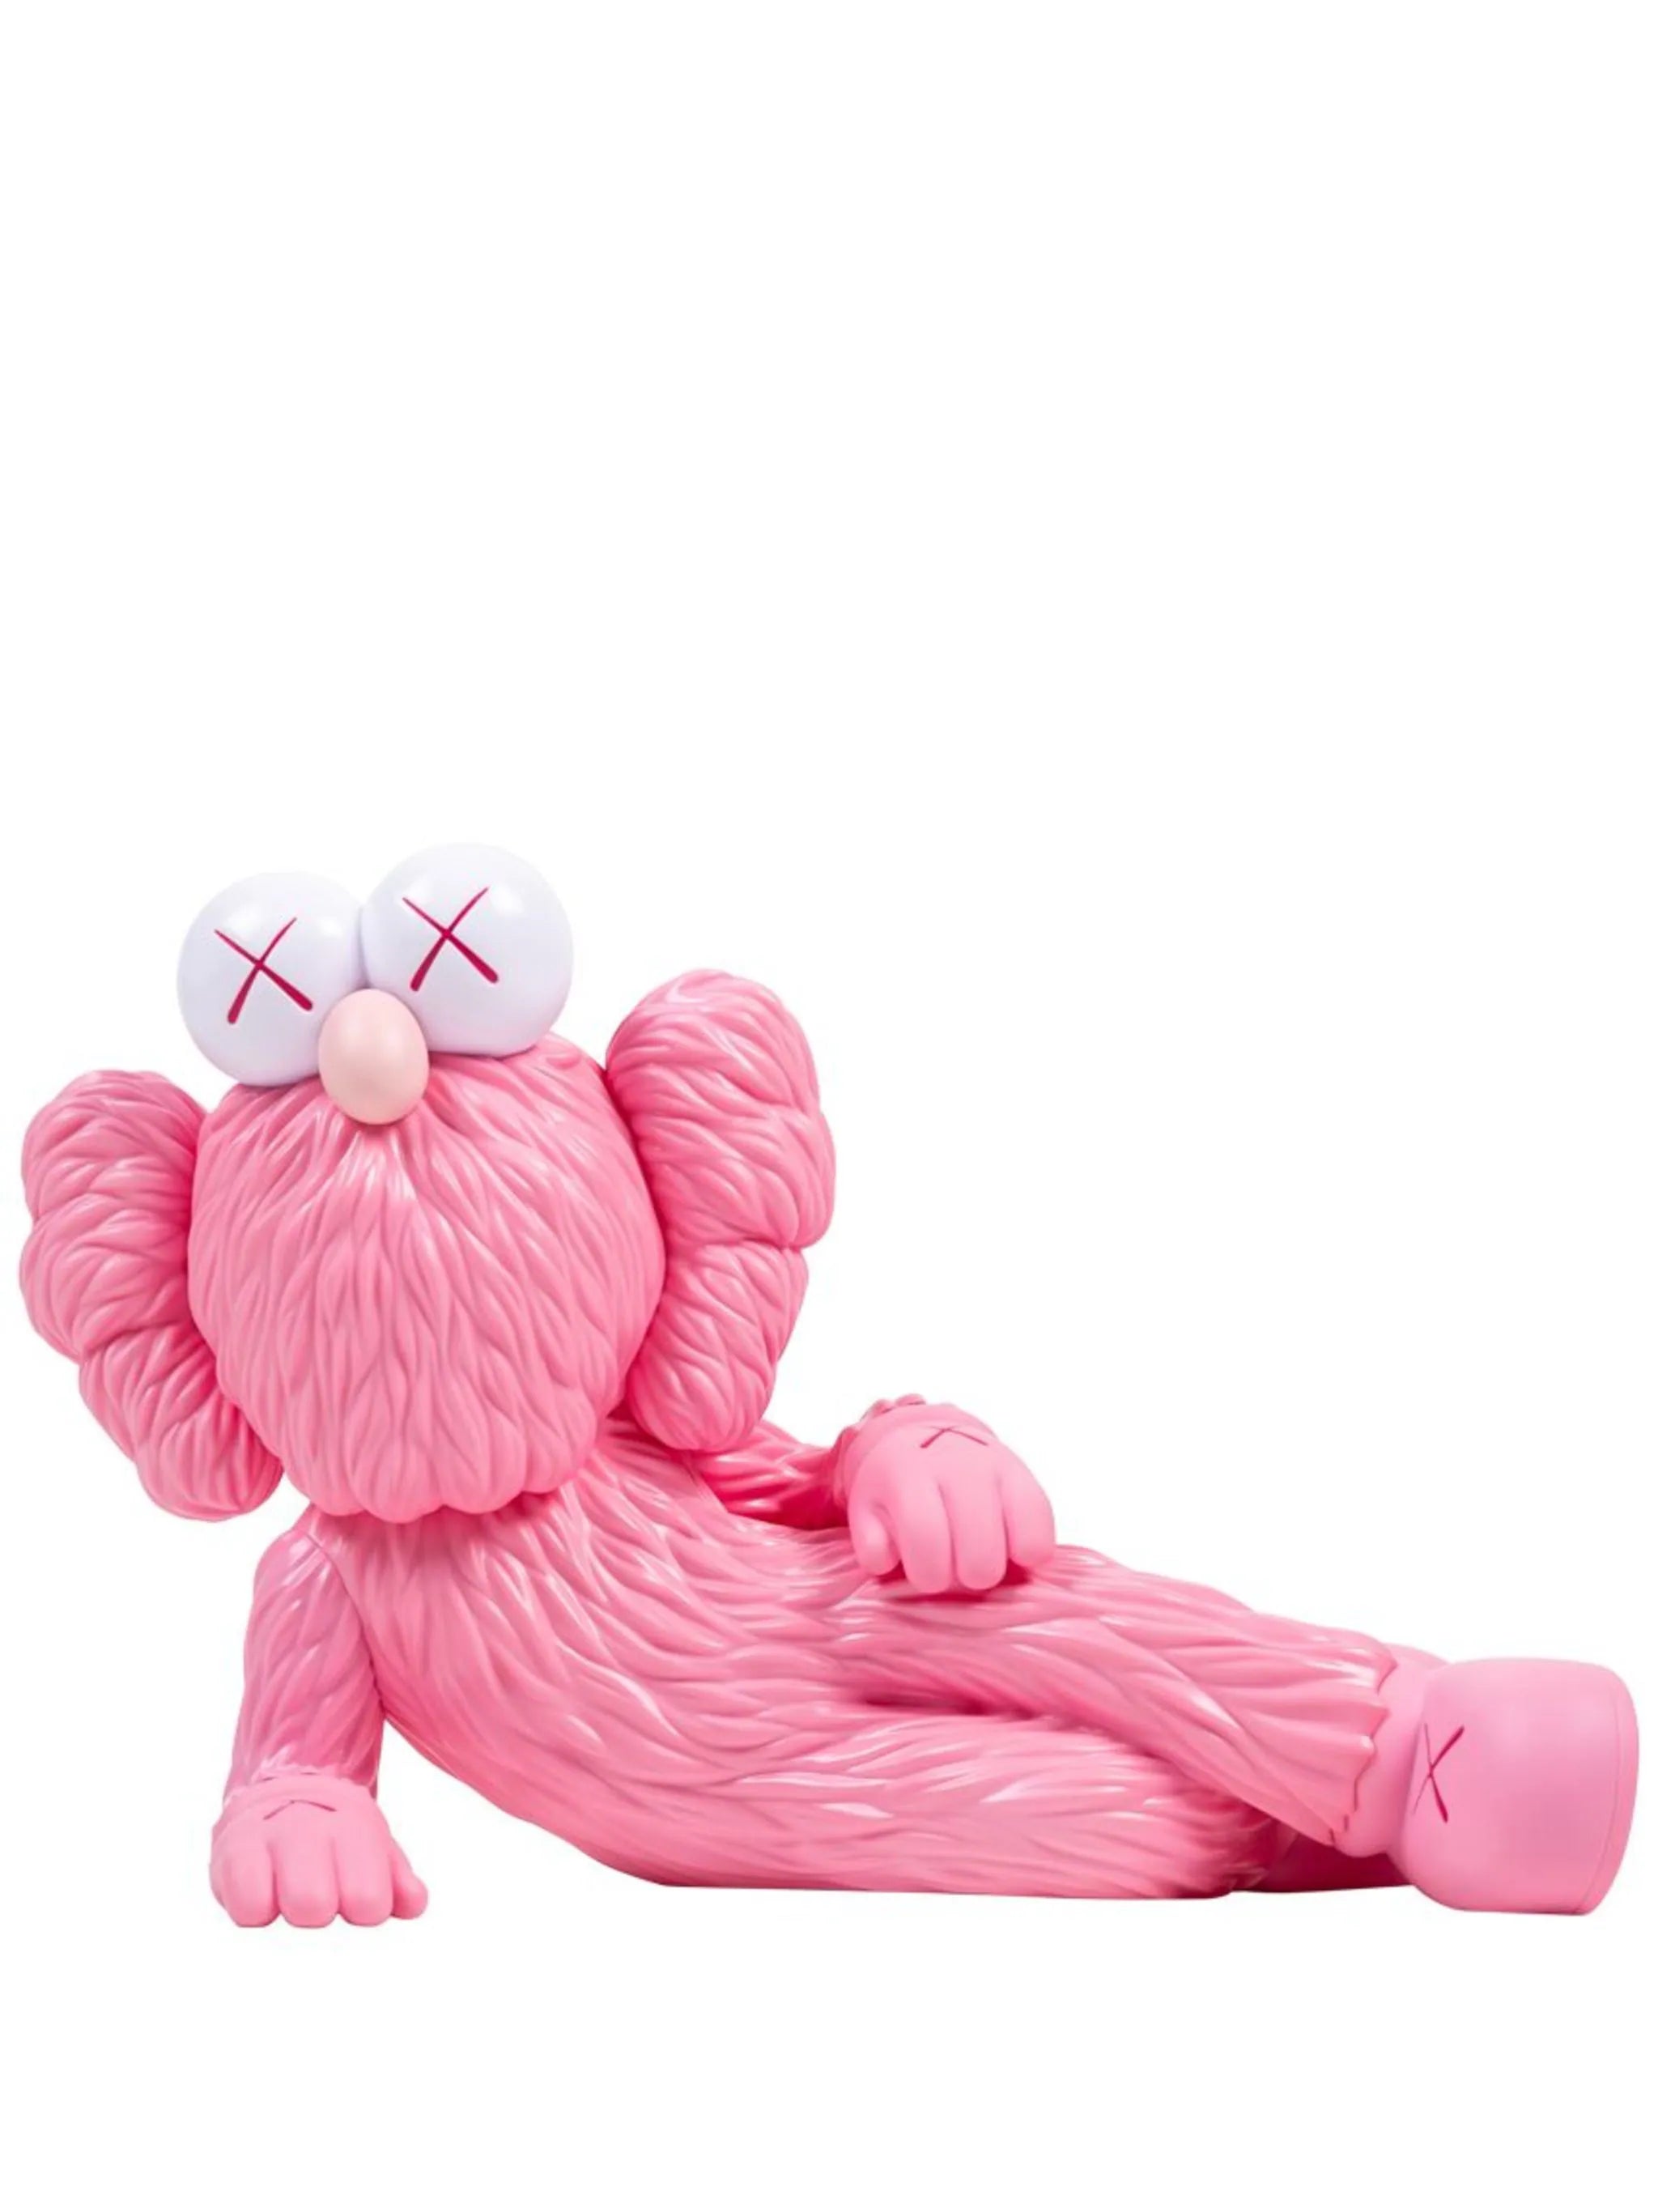 Kaws Open Edition “Time Off” Pink